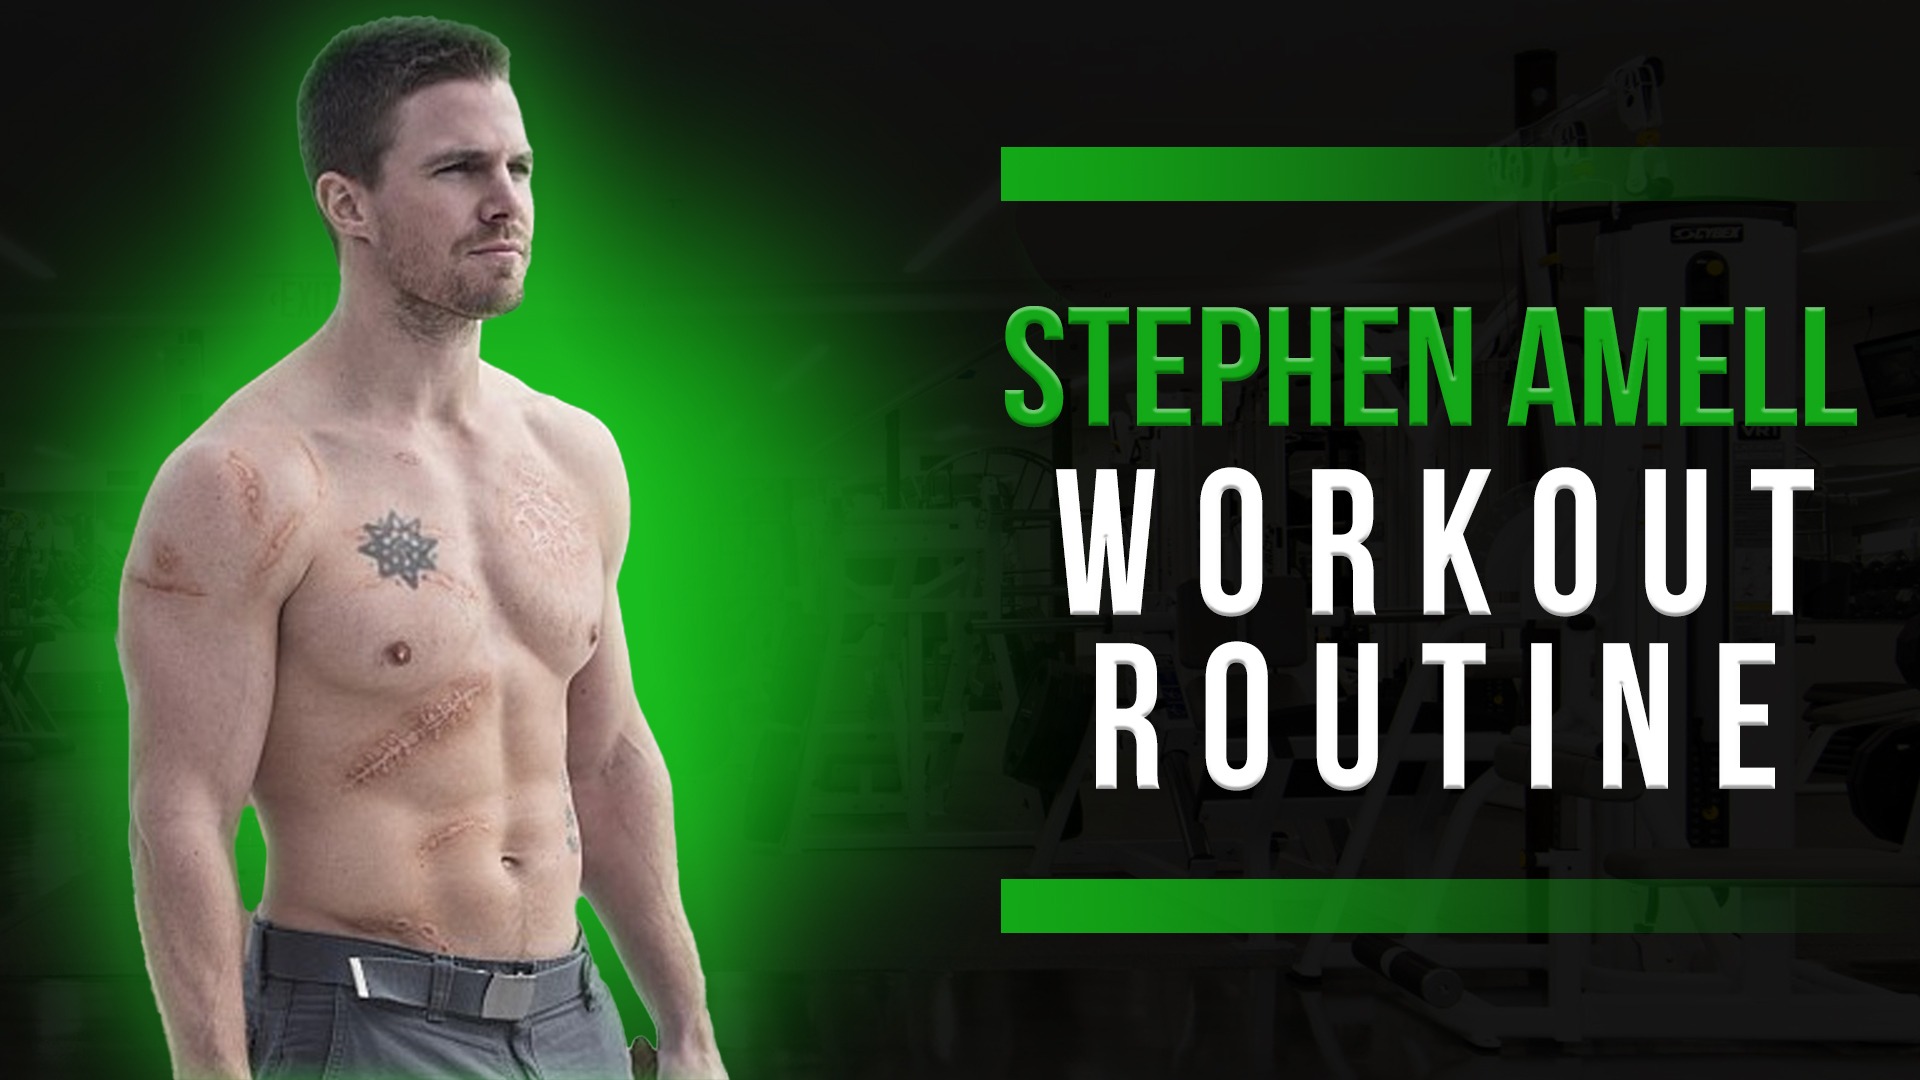 Stephen Amell Workout Routine Version One.